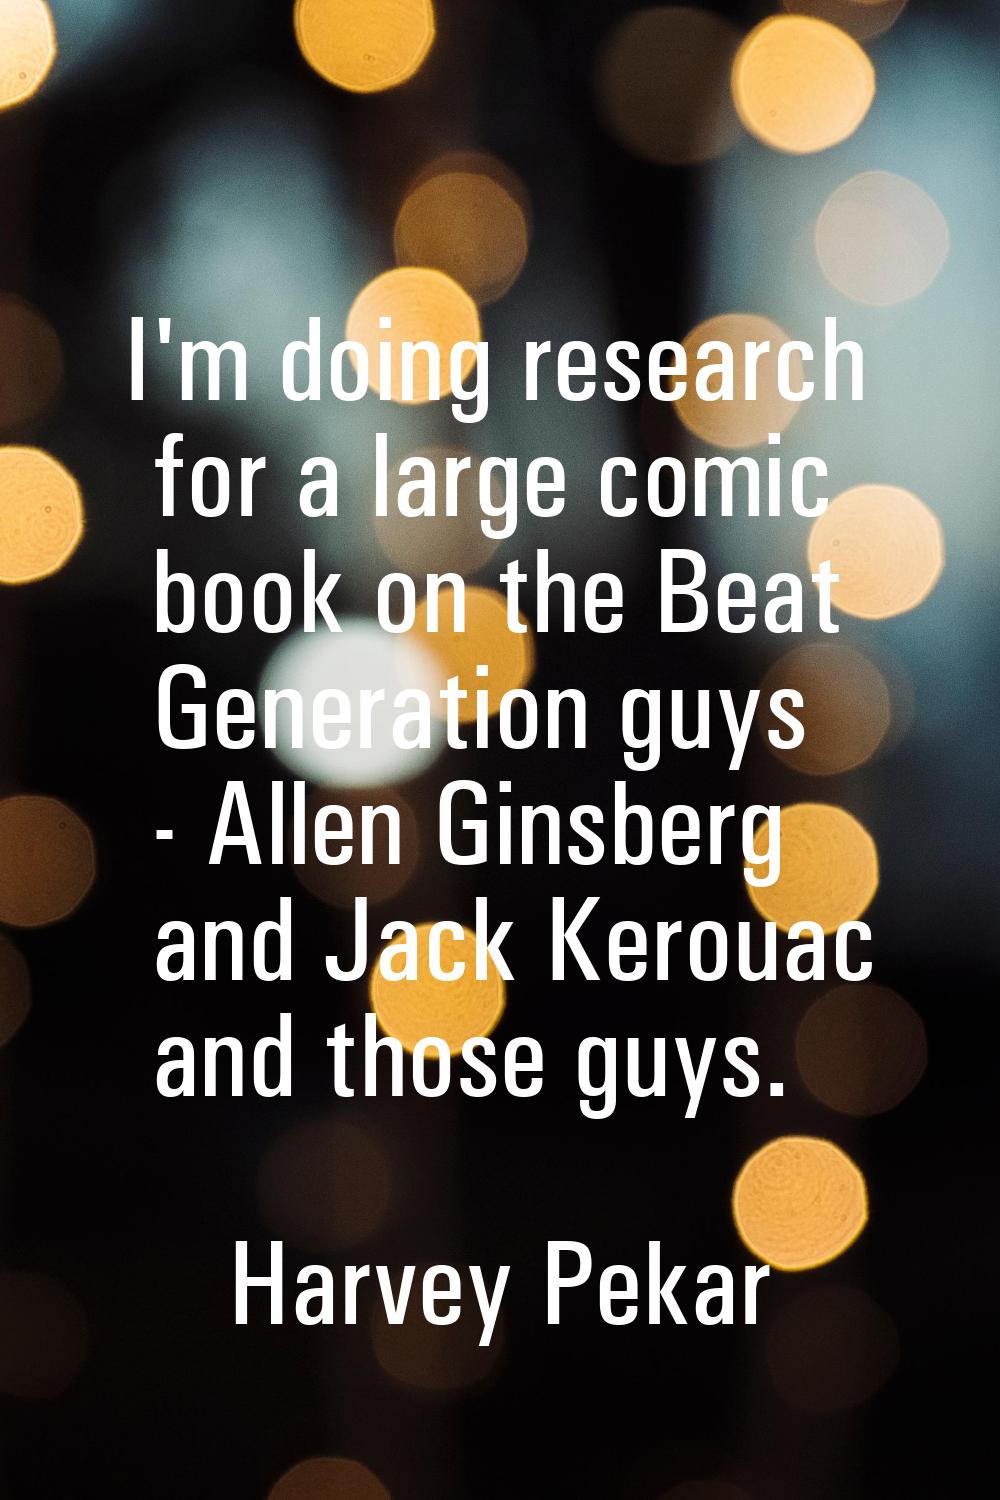 I'm doing research for a large comic book on the Beat Generation guys - Allen Ginsberg and Jack Ker